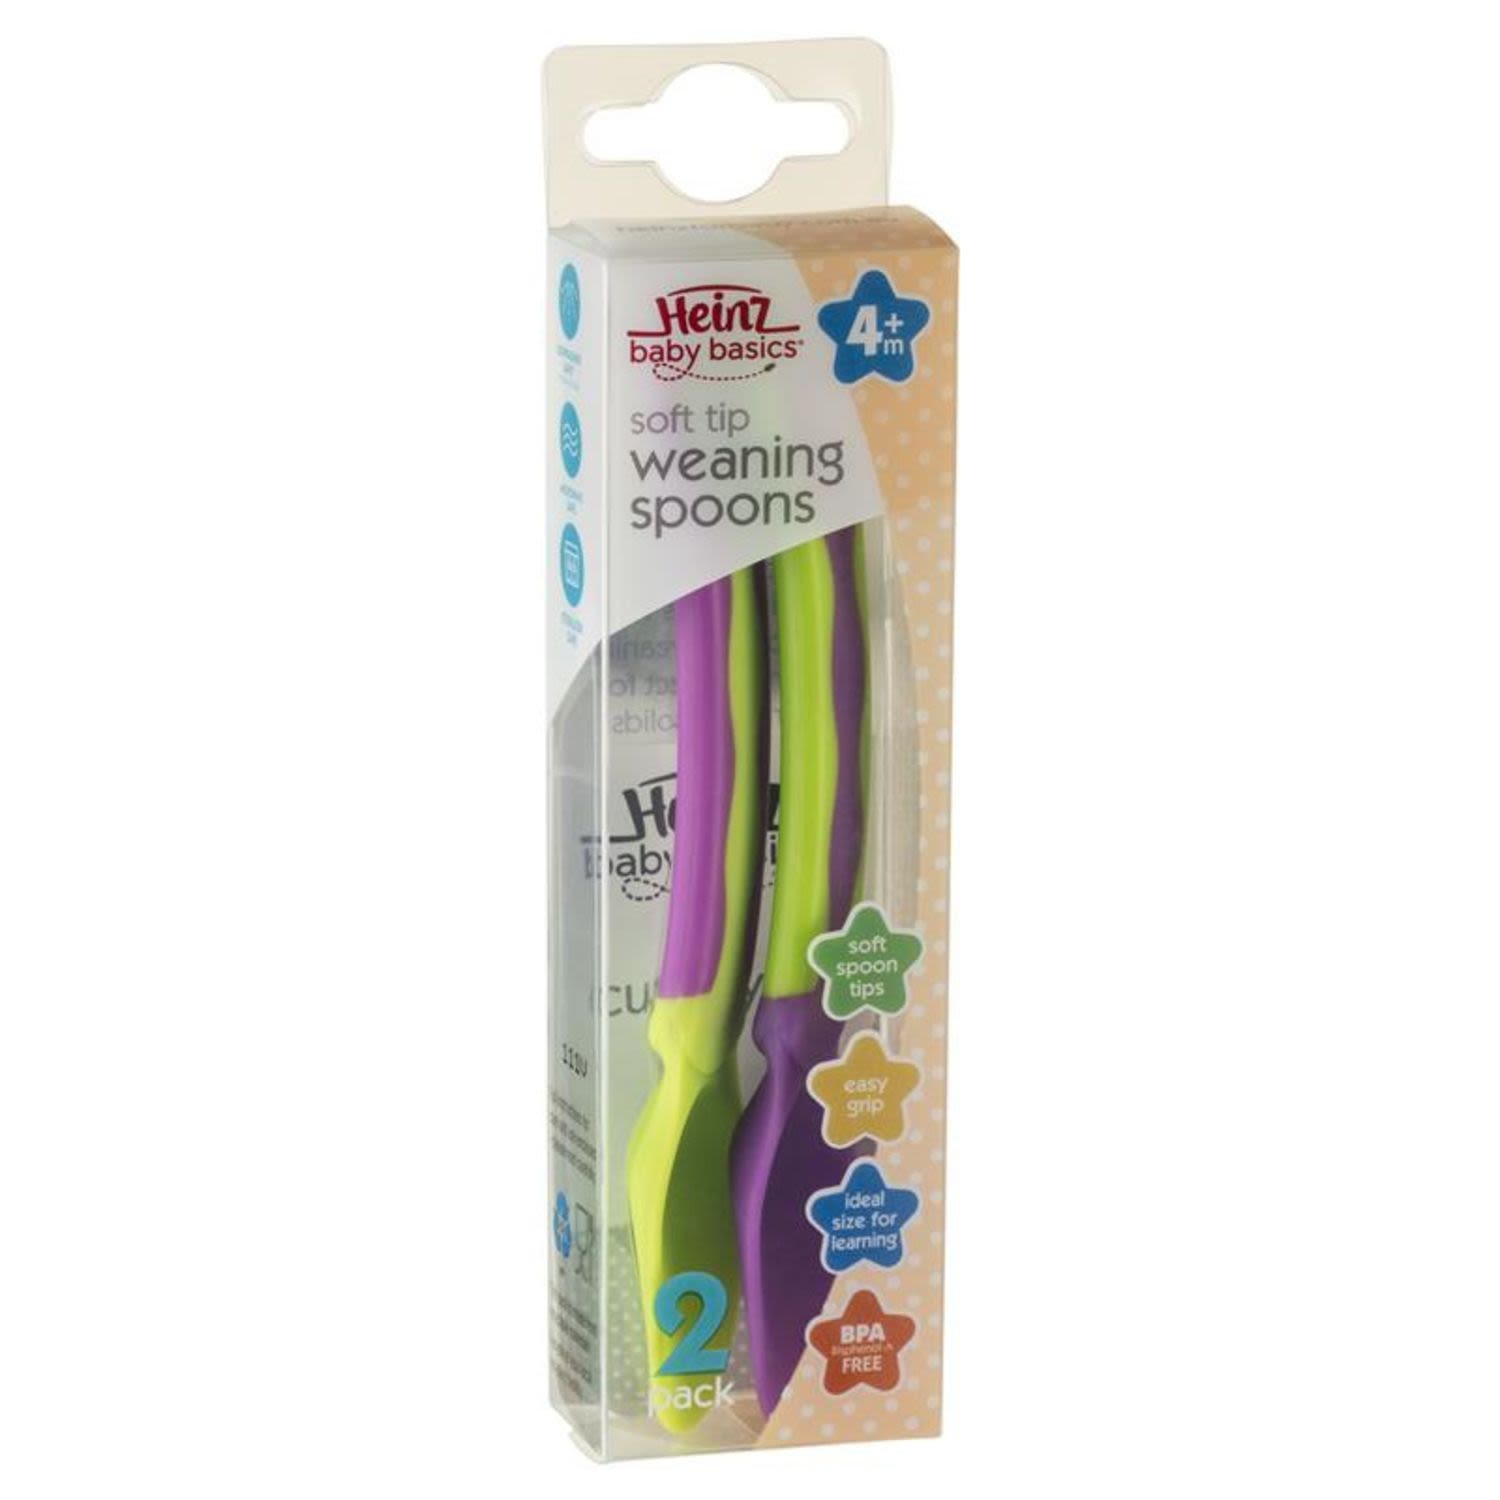 Heinz Baby Basics Weaning Spoons, 2 Each